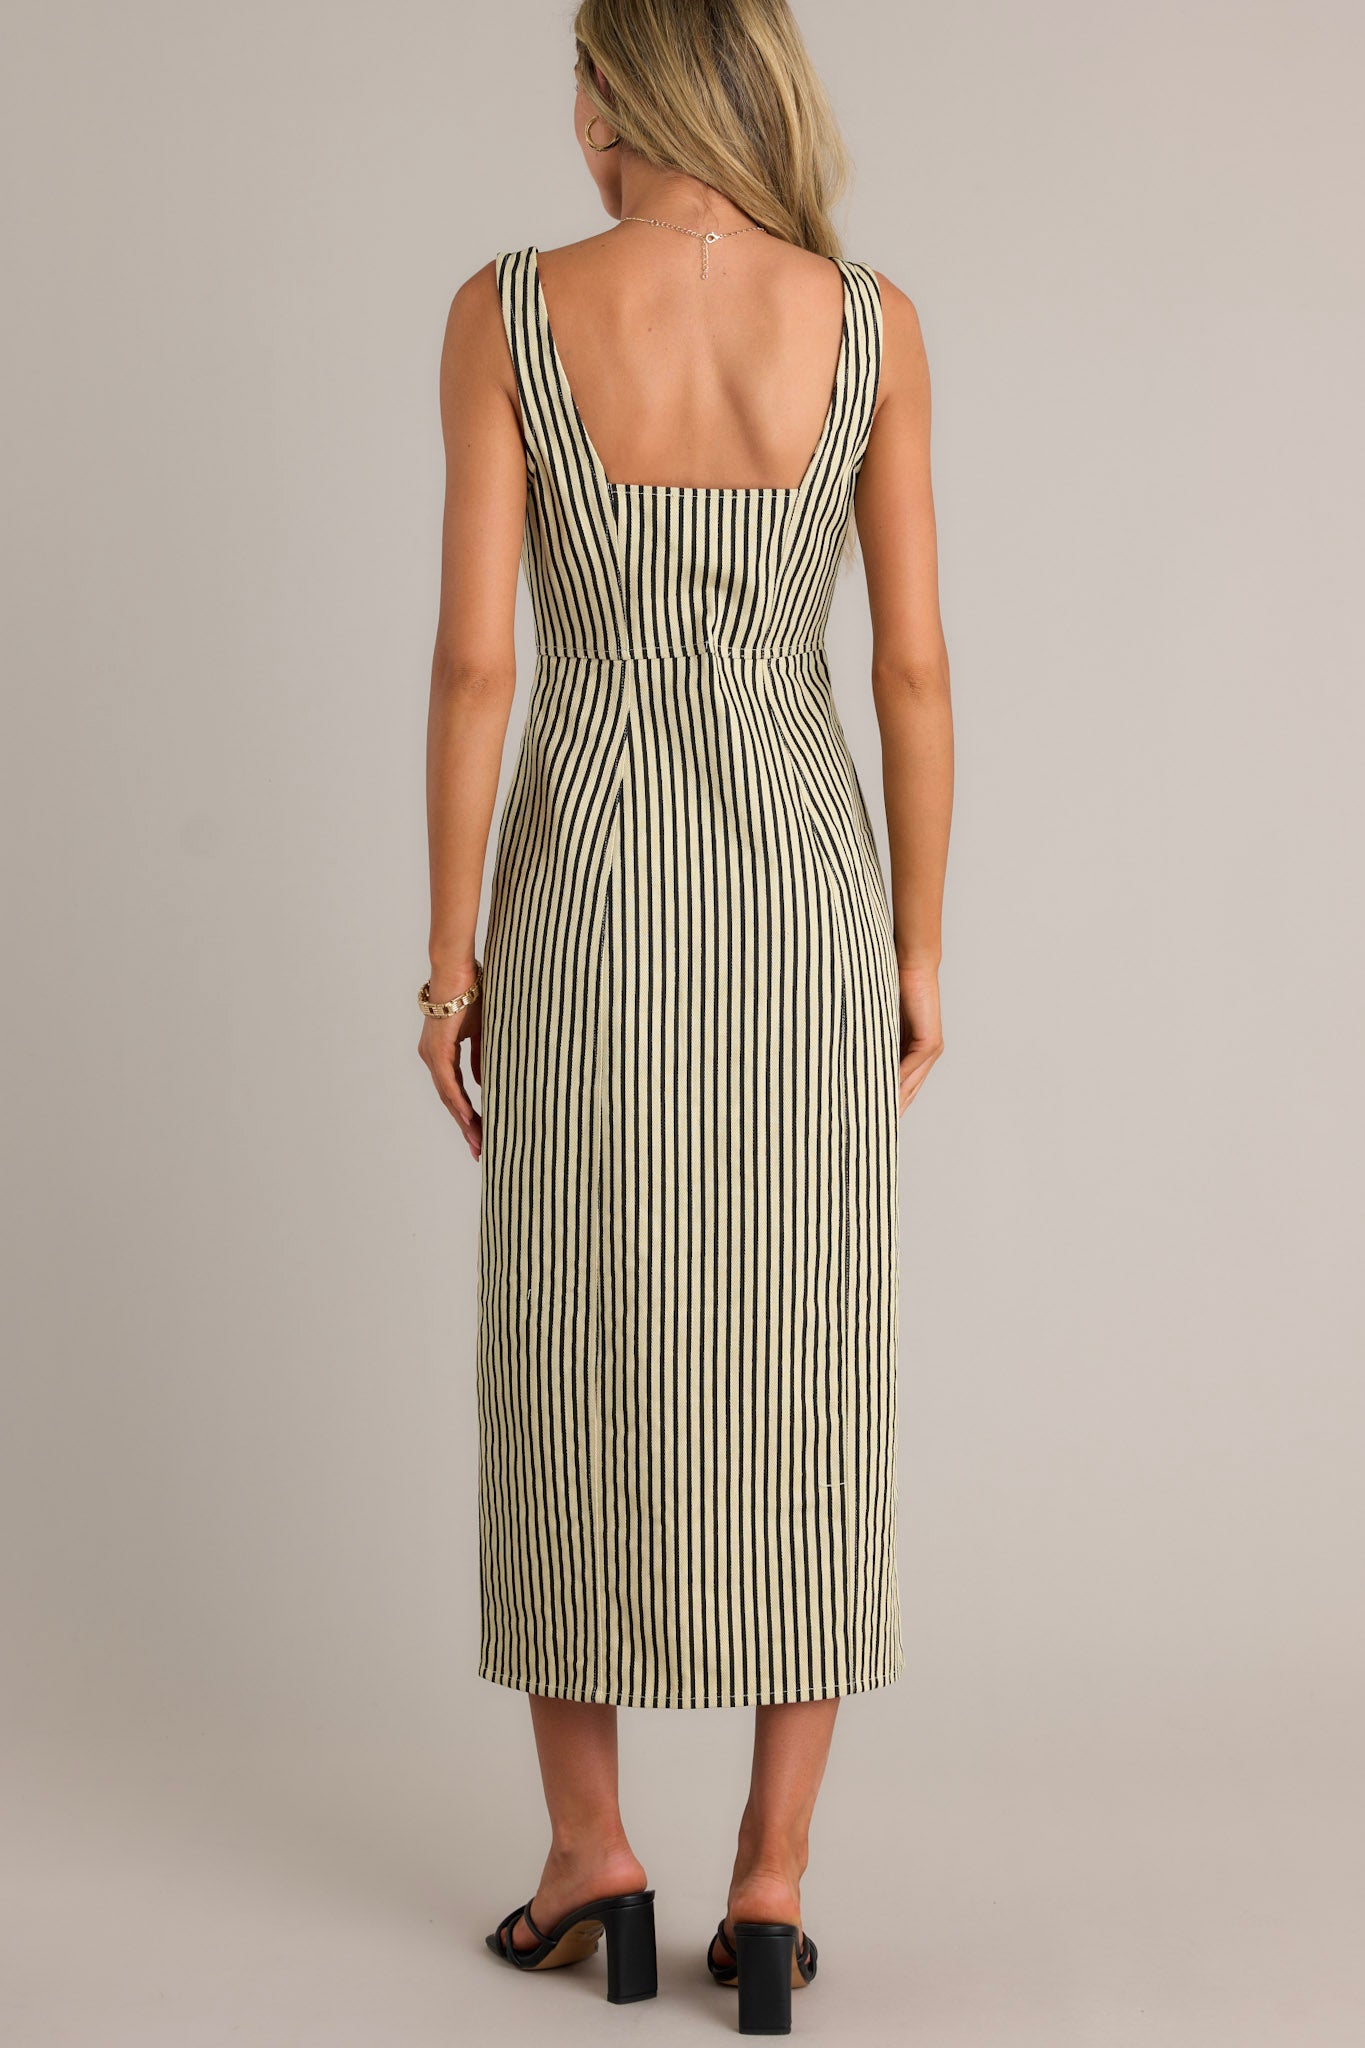 Back view of a black stripe maxi dress highlighting the thick straps, vertical stripe pattern, and overall fit.